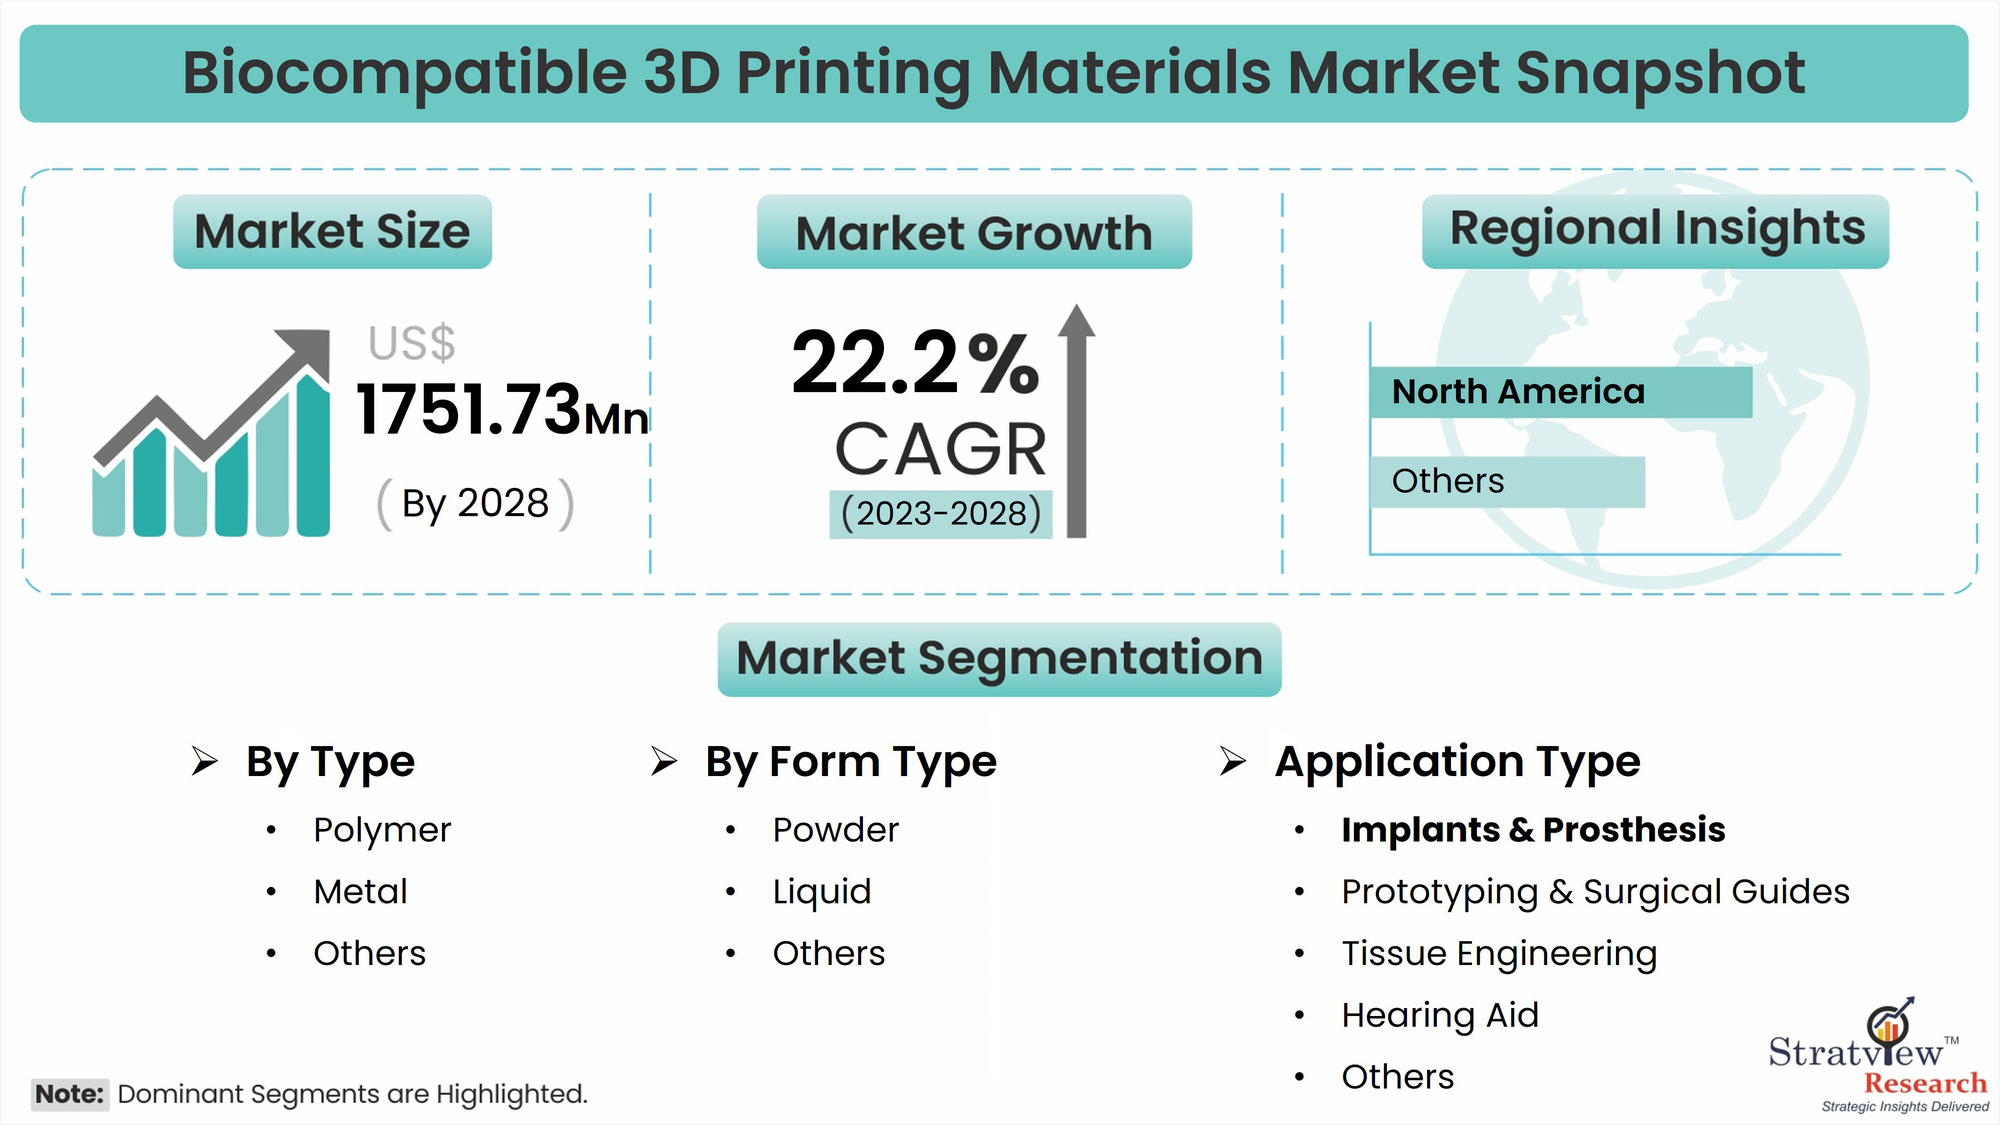 Building the Future of Implants: A Deep Dive into Biocompatible 3D Printing